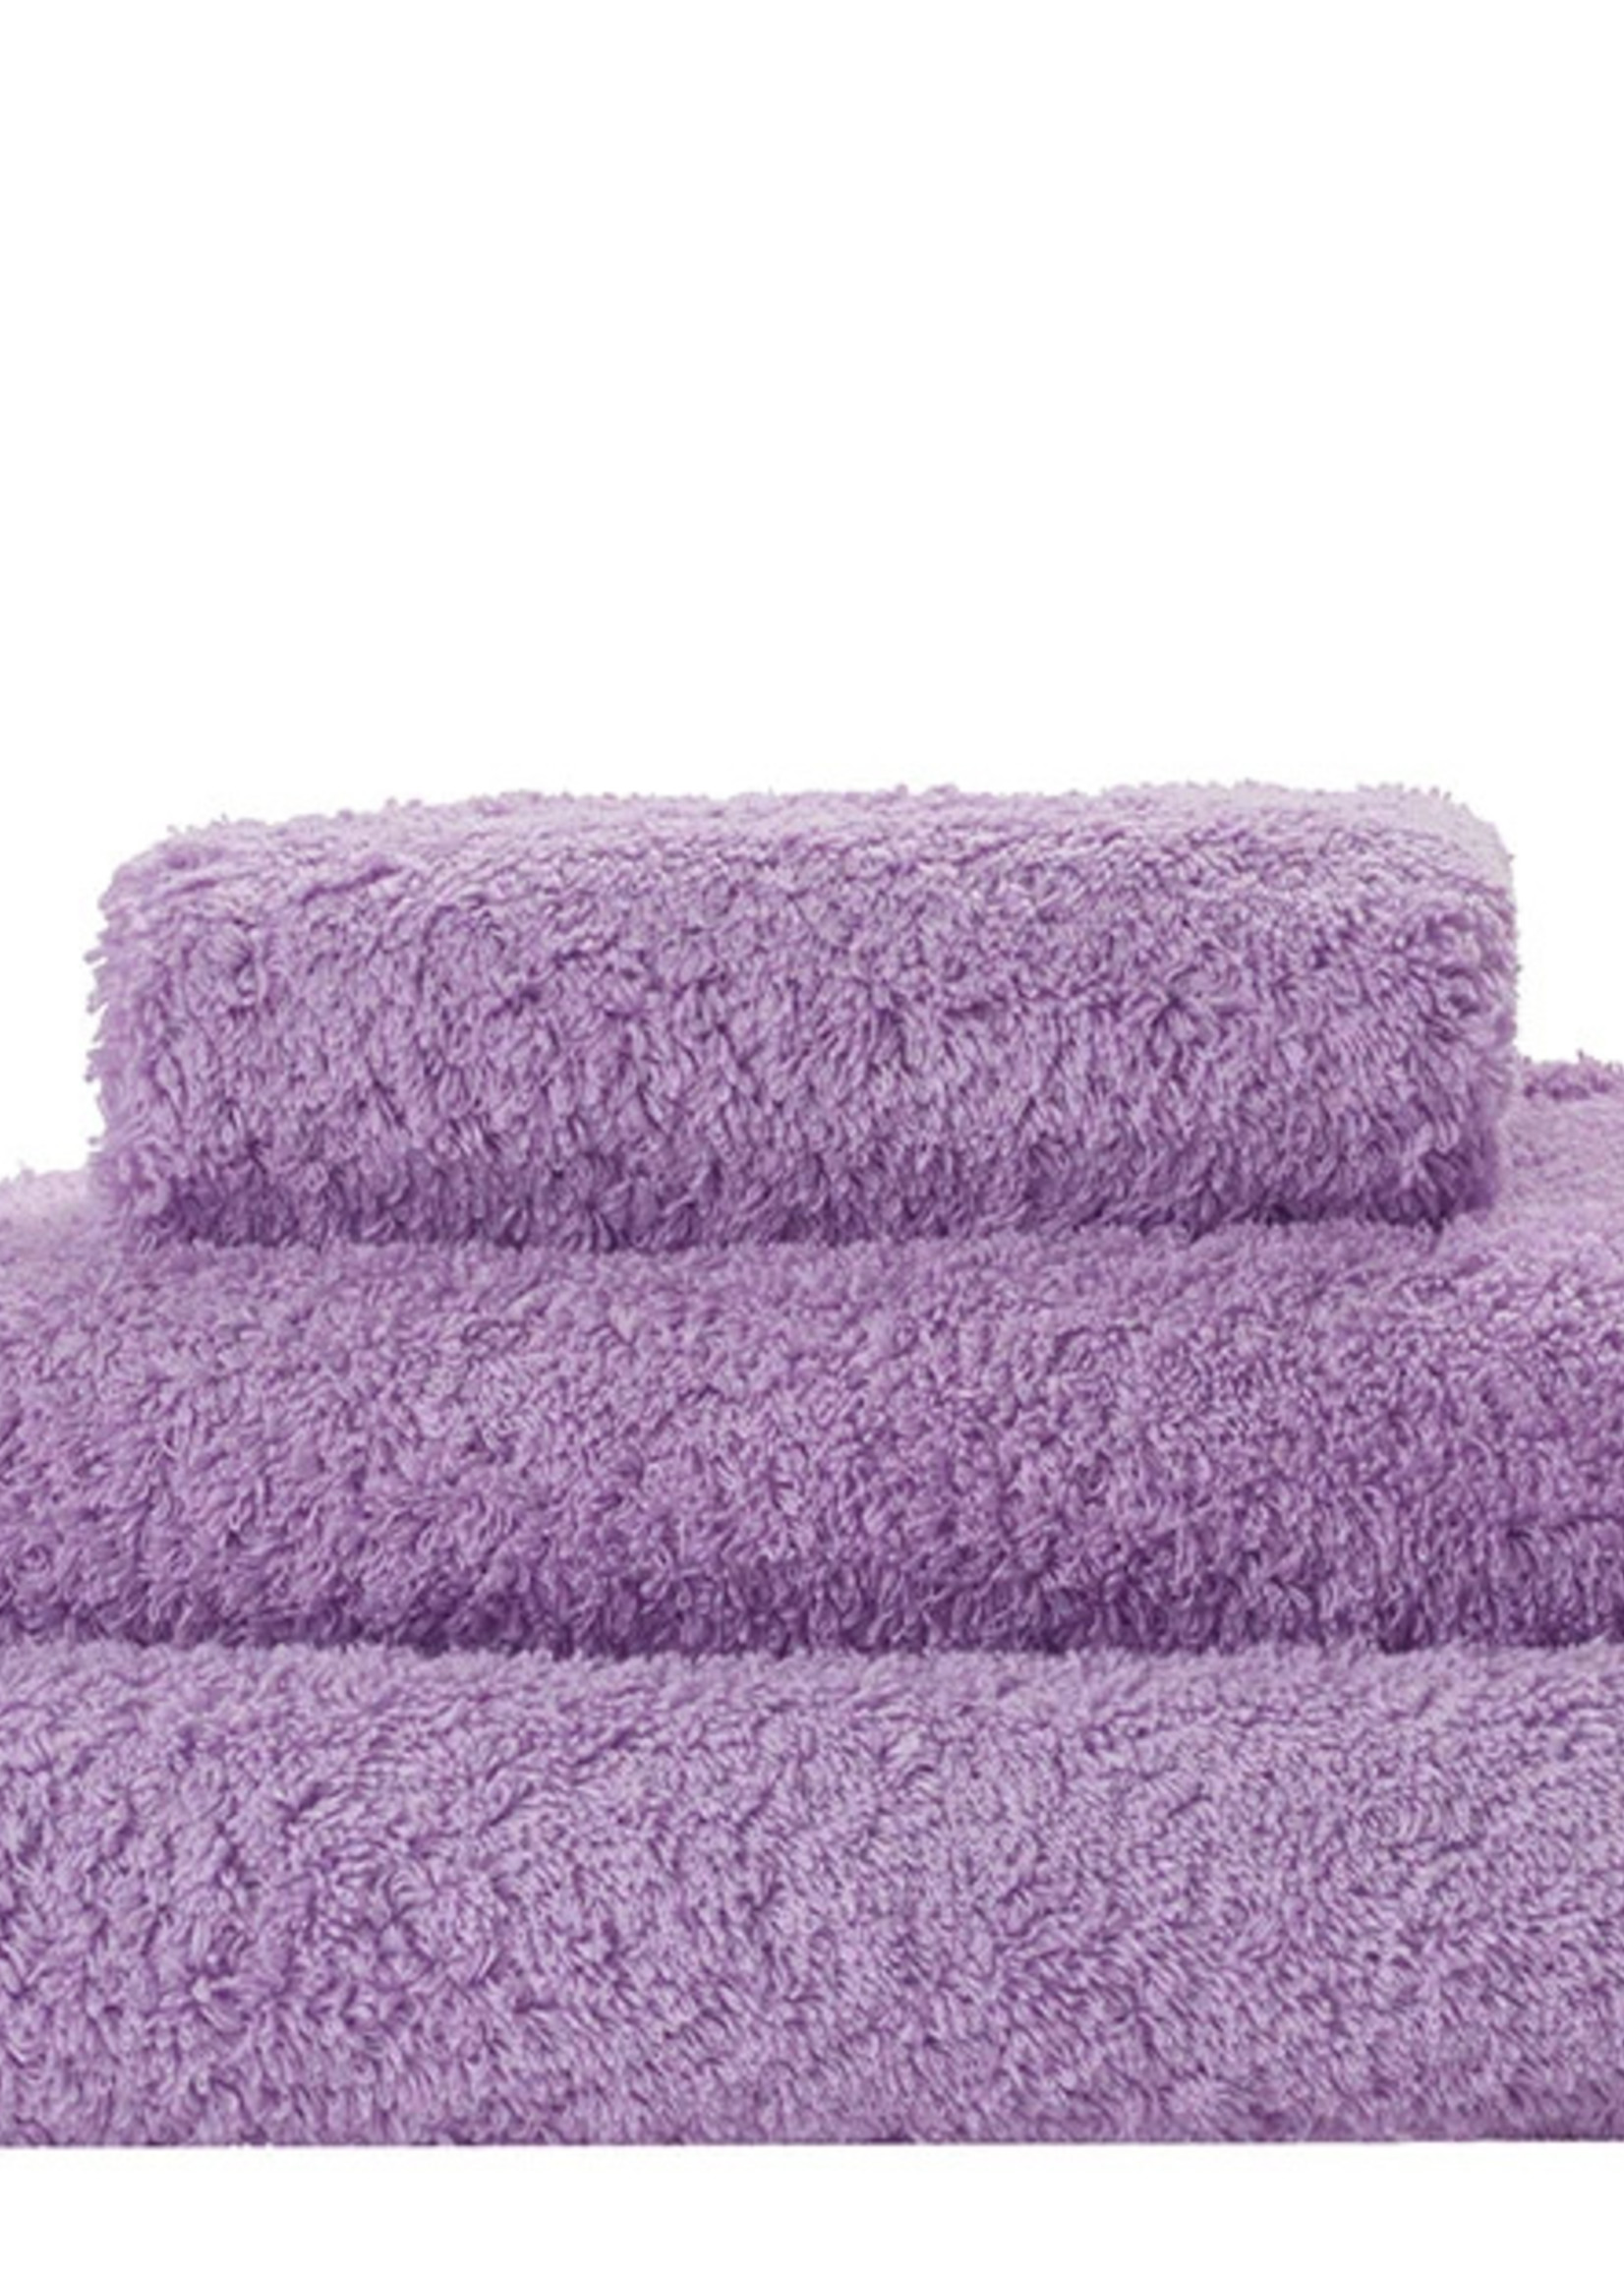 Abyss & Habidecor Super Pile Lupin Towels